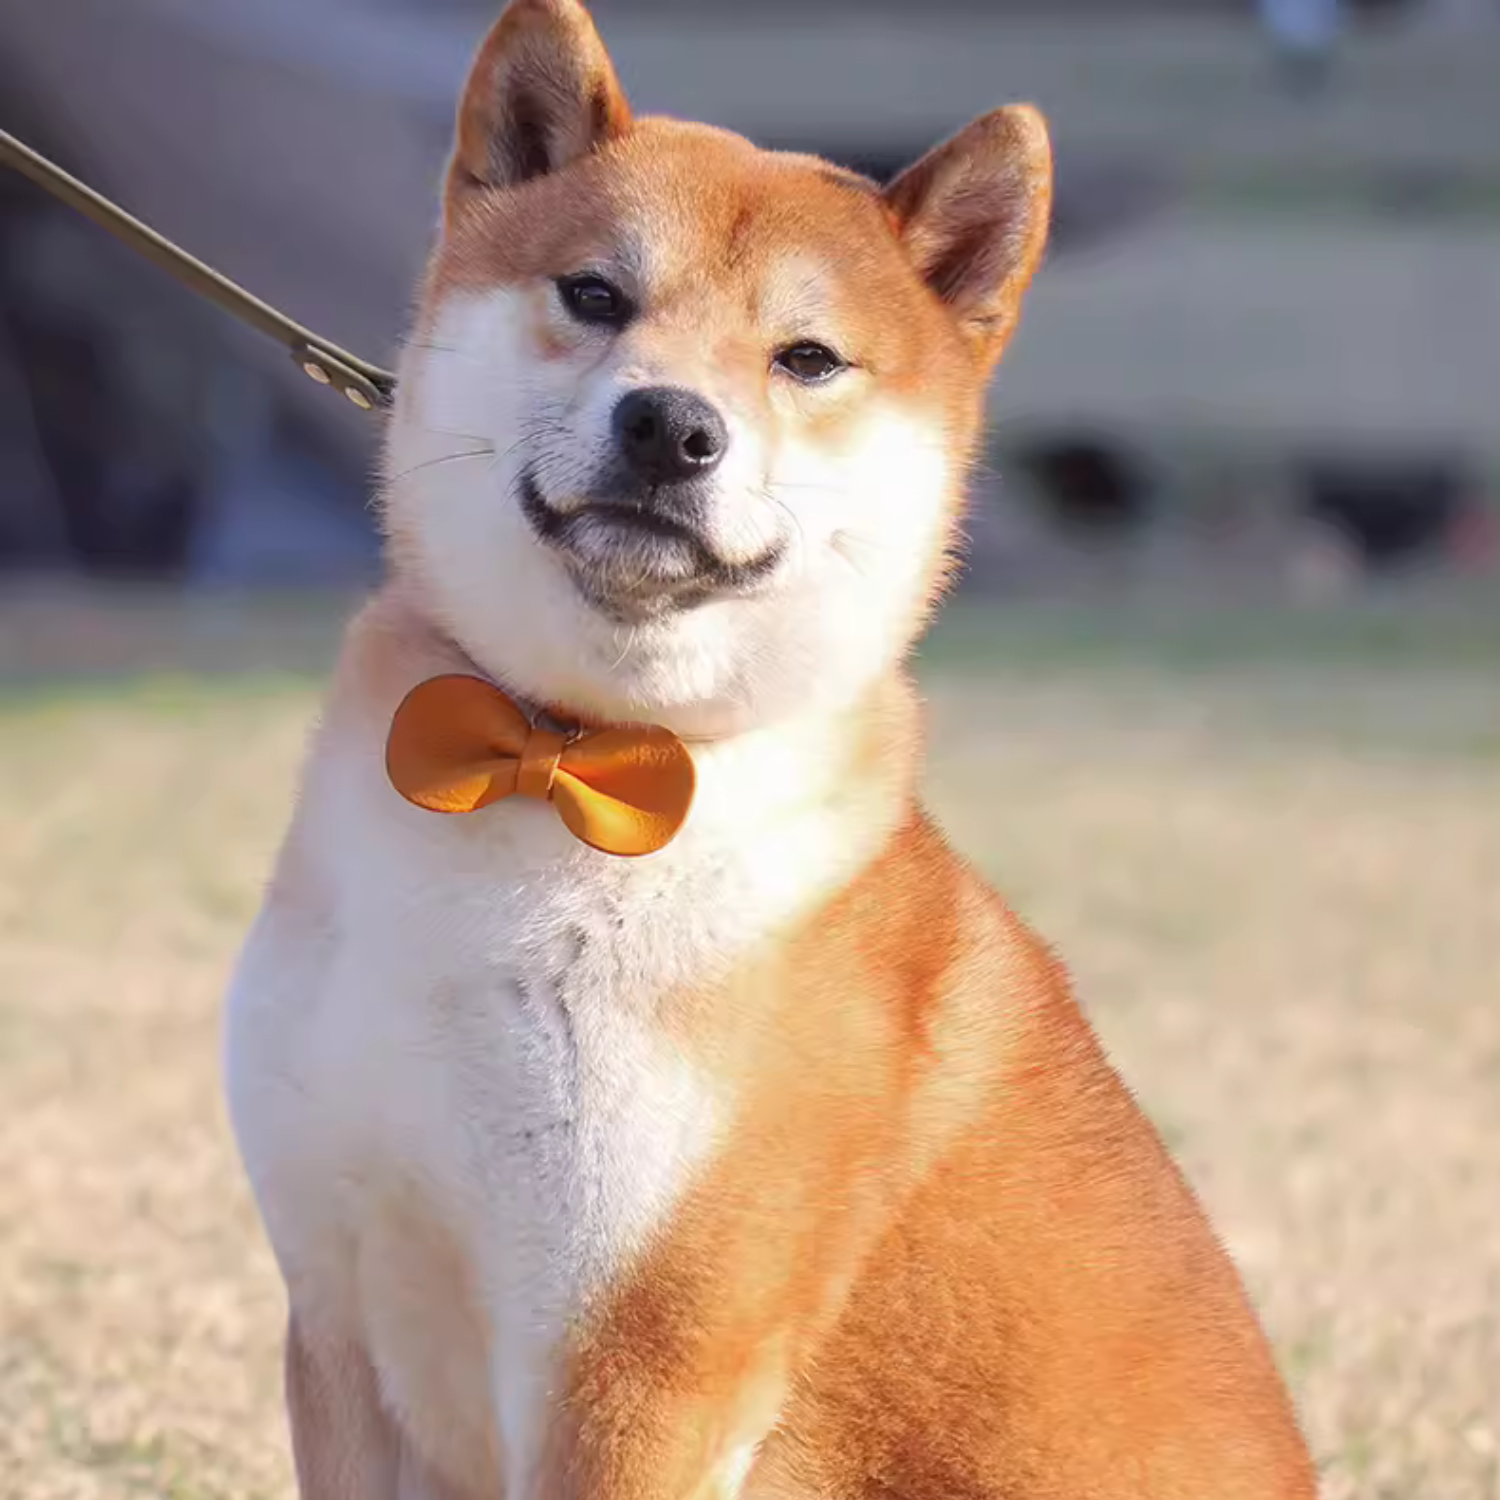 Shiba Inu adorned with a yellow Leather Removable Pet Bowtie from Petcustomi, showcasing its vibrant and playful personality.